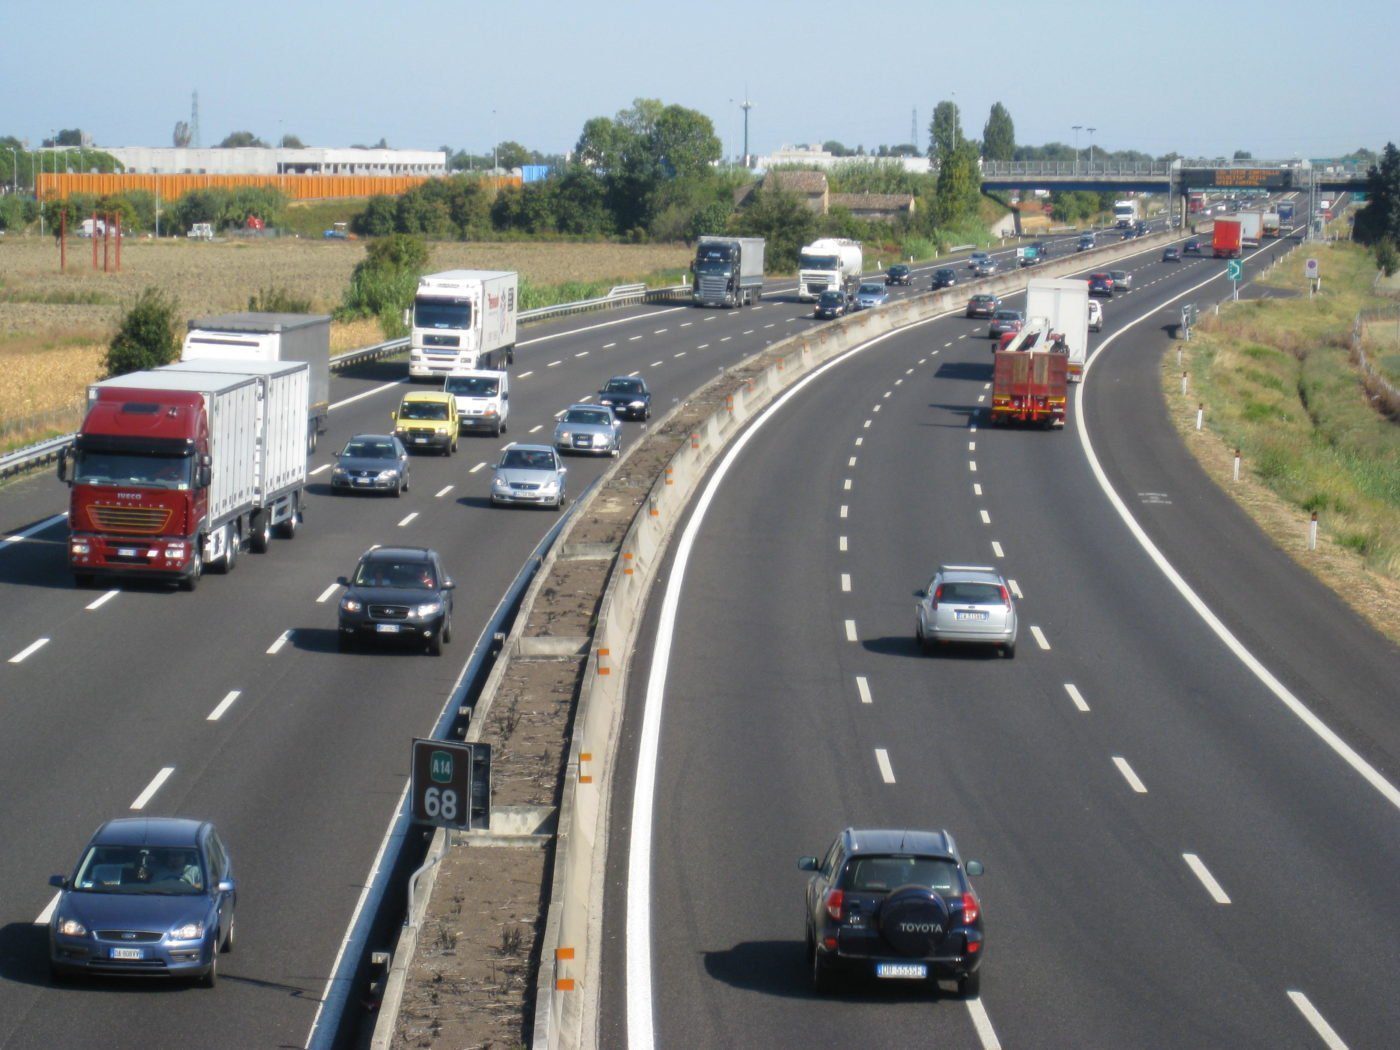 the Autostrada in Italy